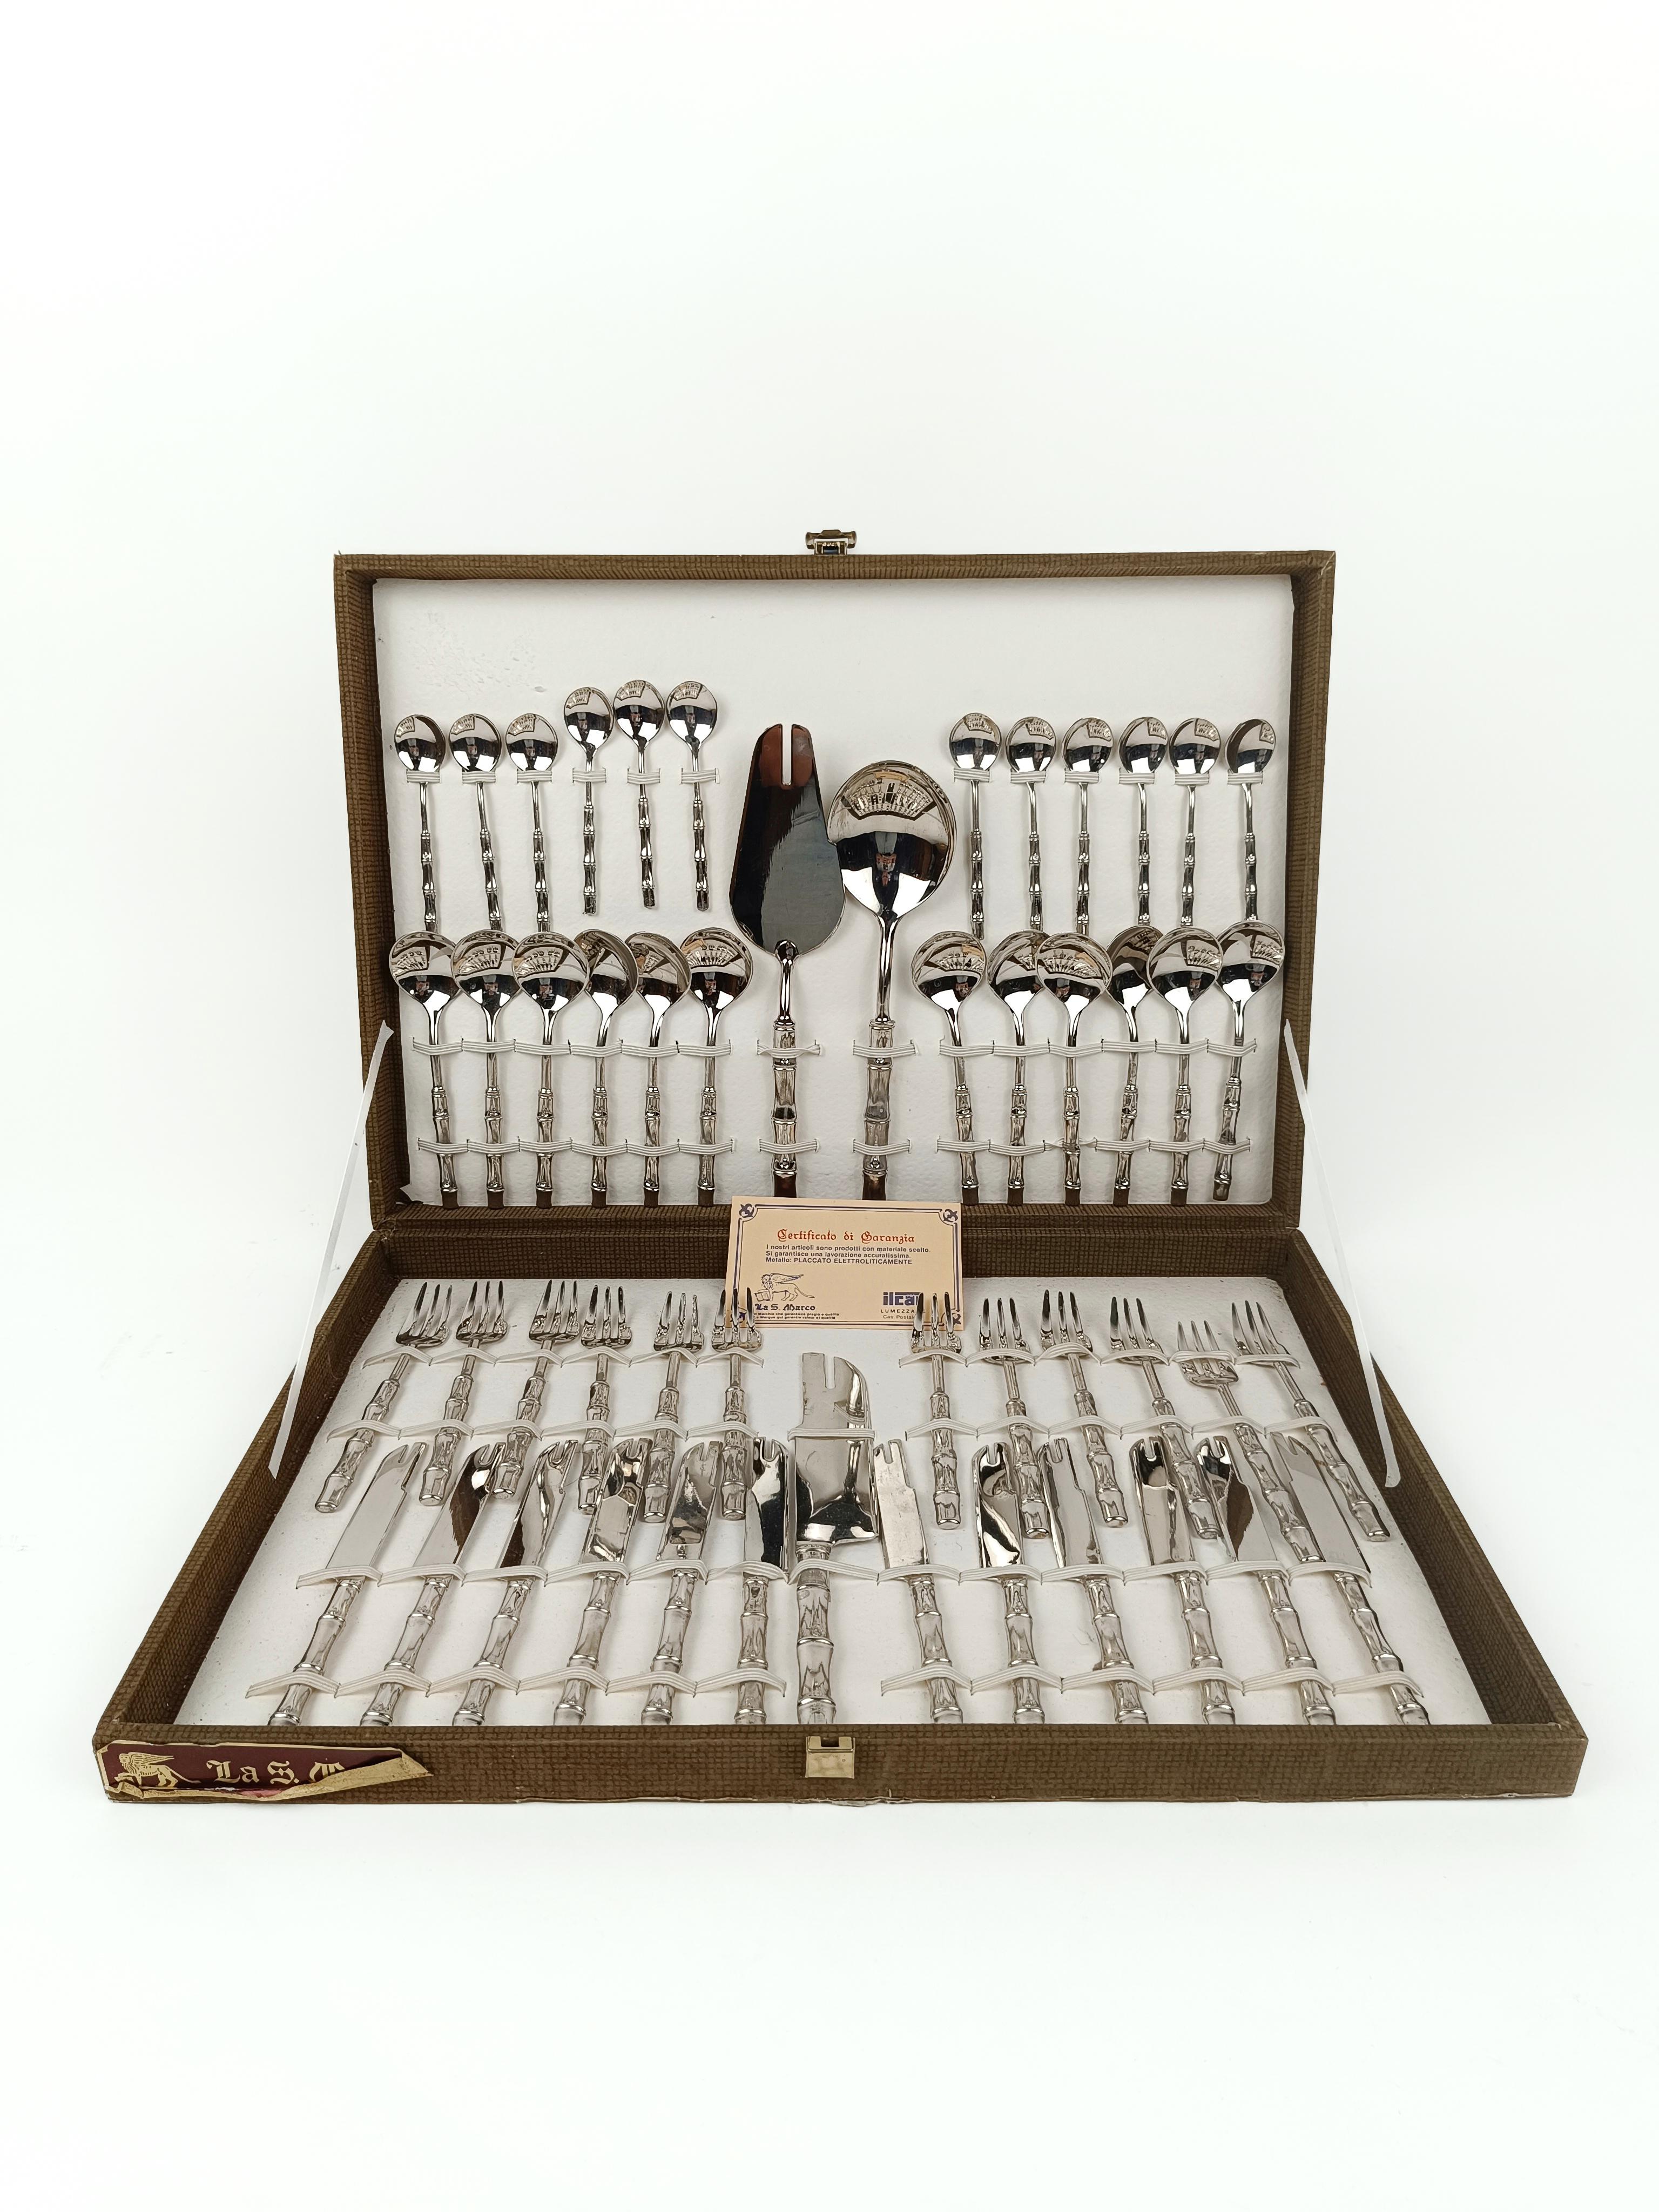 A Mid Century Modern dessert cutlery set made in Italy by the historic cutlery company 